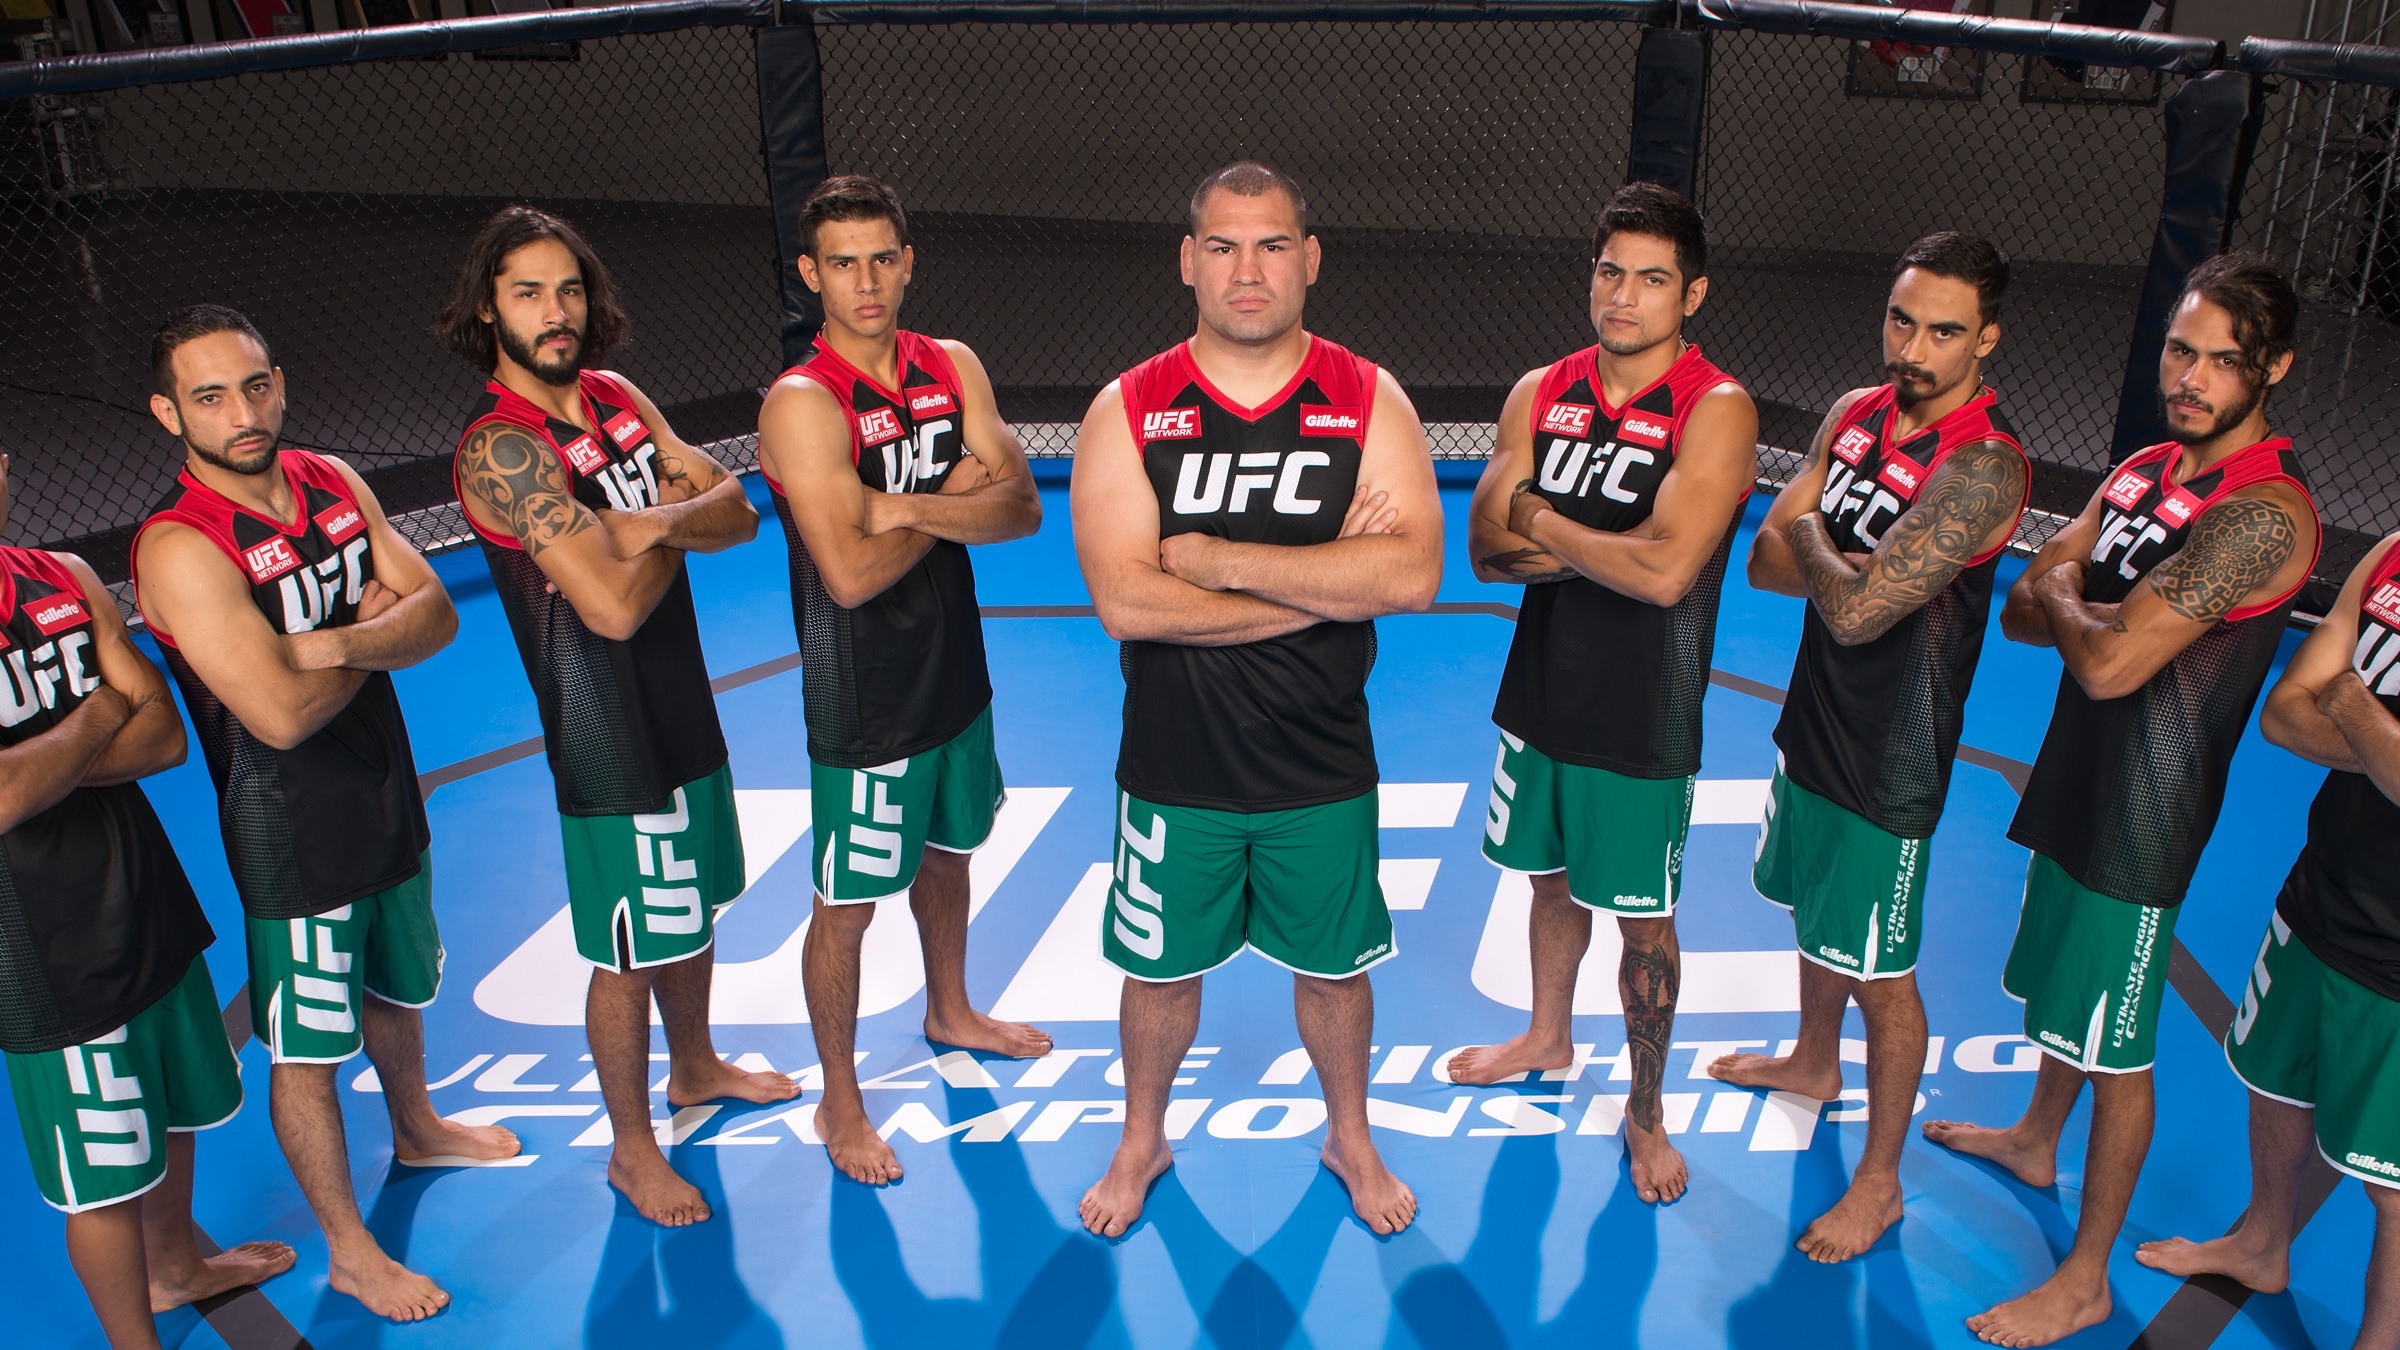 How to watch The Ultimate Fighter season 31 online: stream the MMA